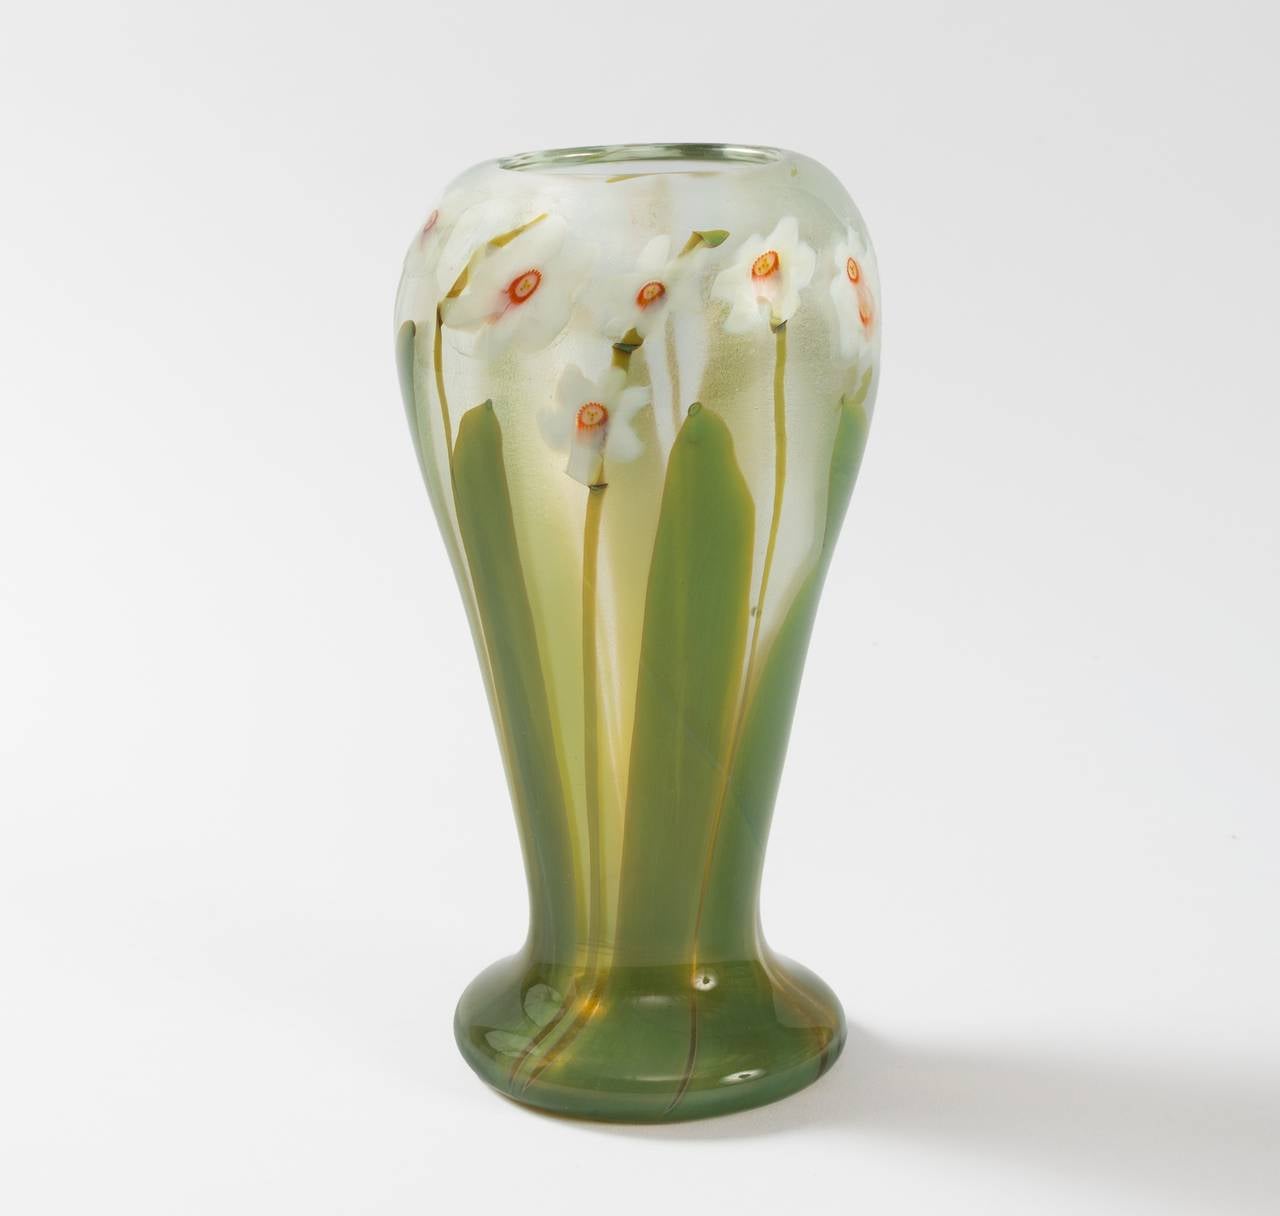 A Tiffany Studios New York Art Nouveau ‘paperweight’ glass vase. White blossoms with pink millefiori florets sprinkled throughout a green pulled-leaf motif, all featured on a clear background.

The paperweight technique involved fusing thin rods of